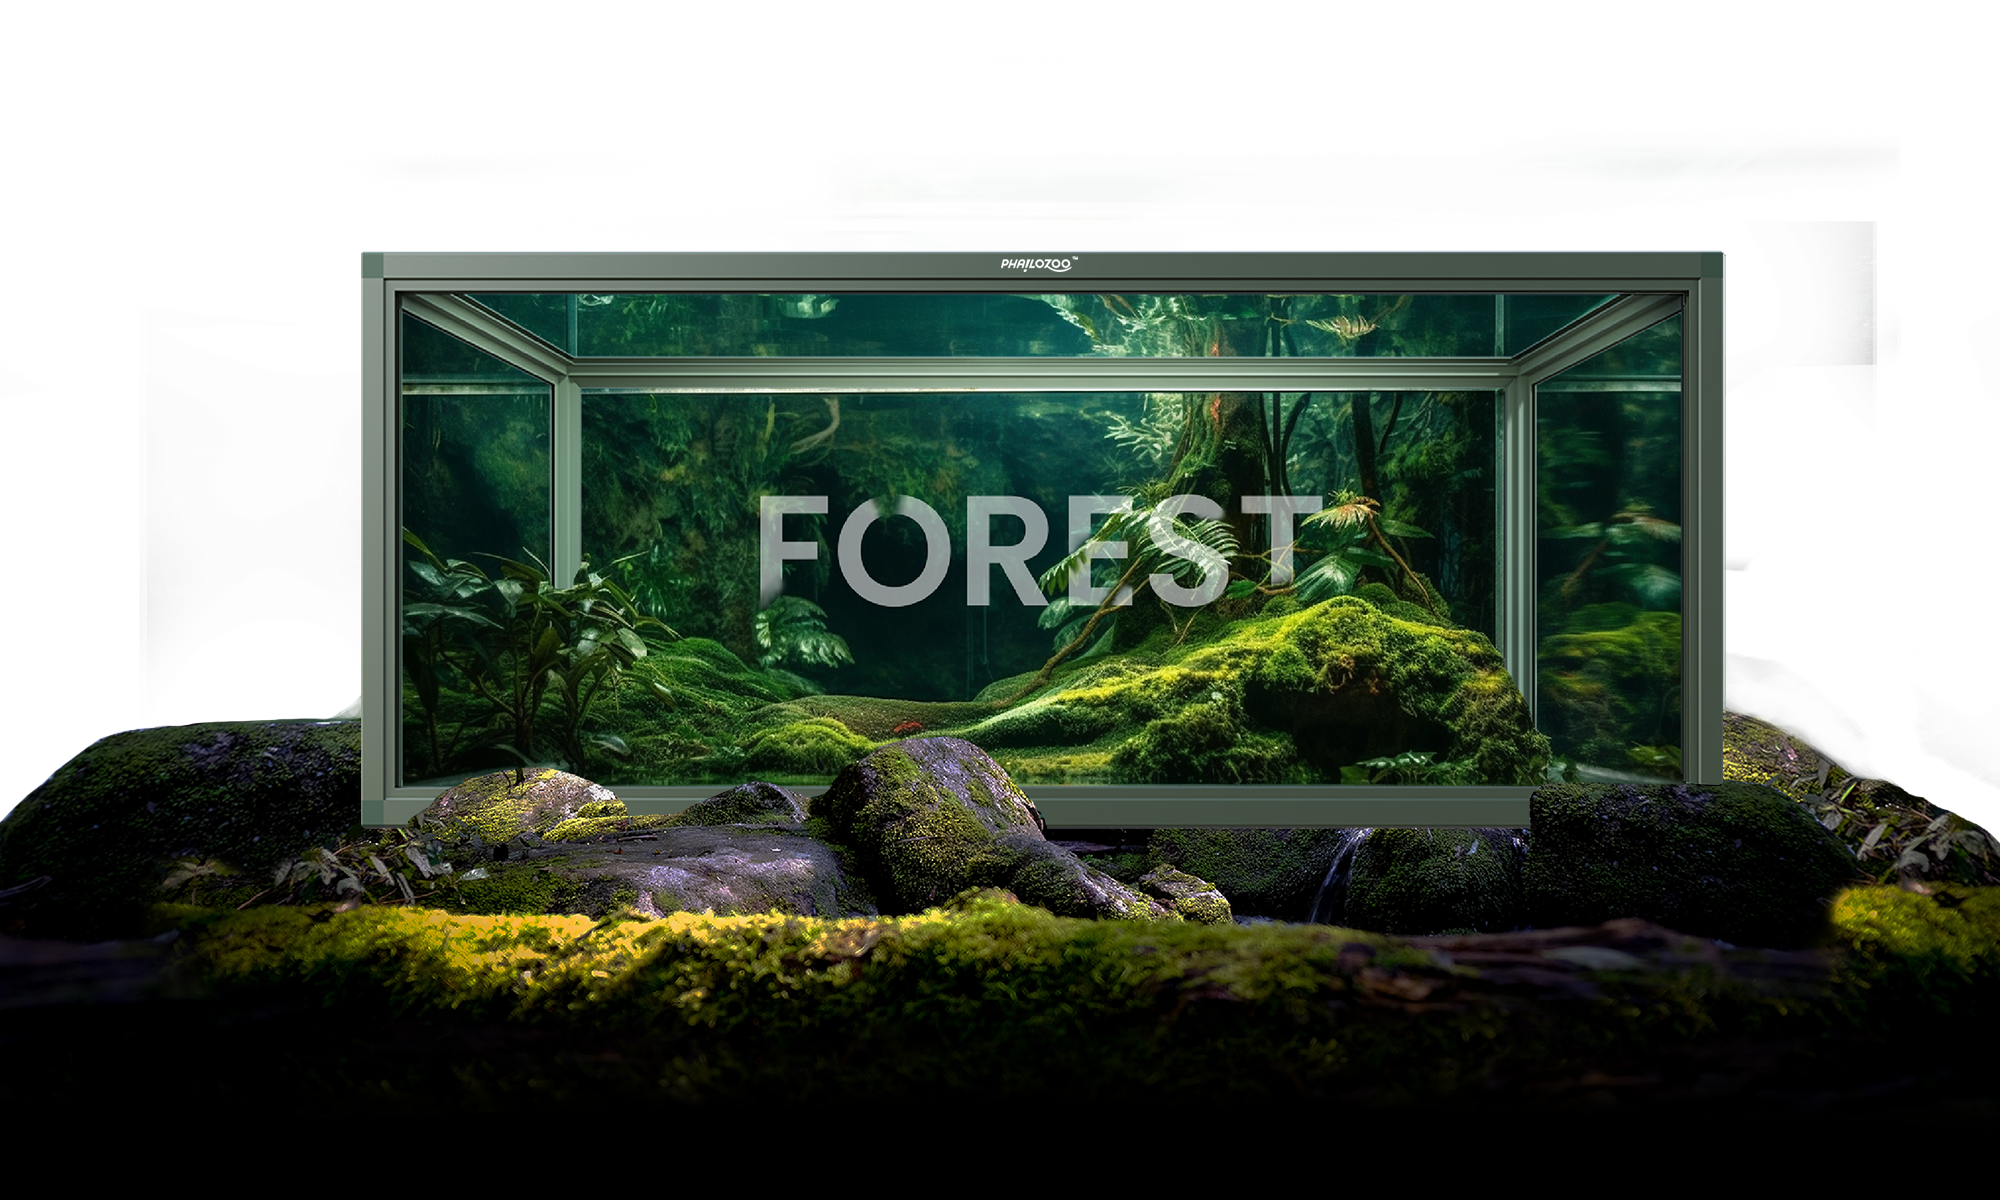 Phailozoo 85 gallon reptile enclosure in a fully bioactive terrariums with flowers, butterflies, plants in a forest and tropical settin